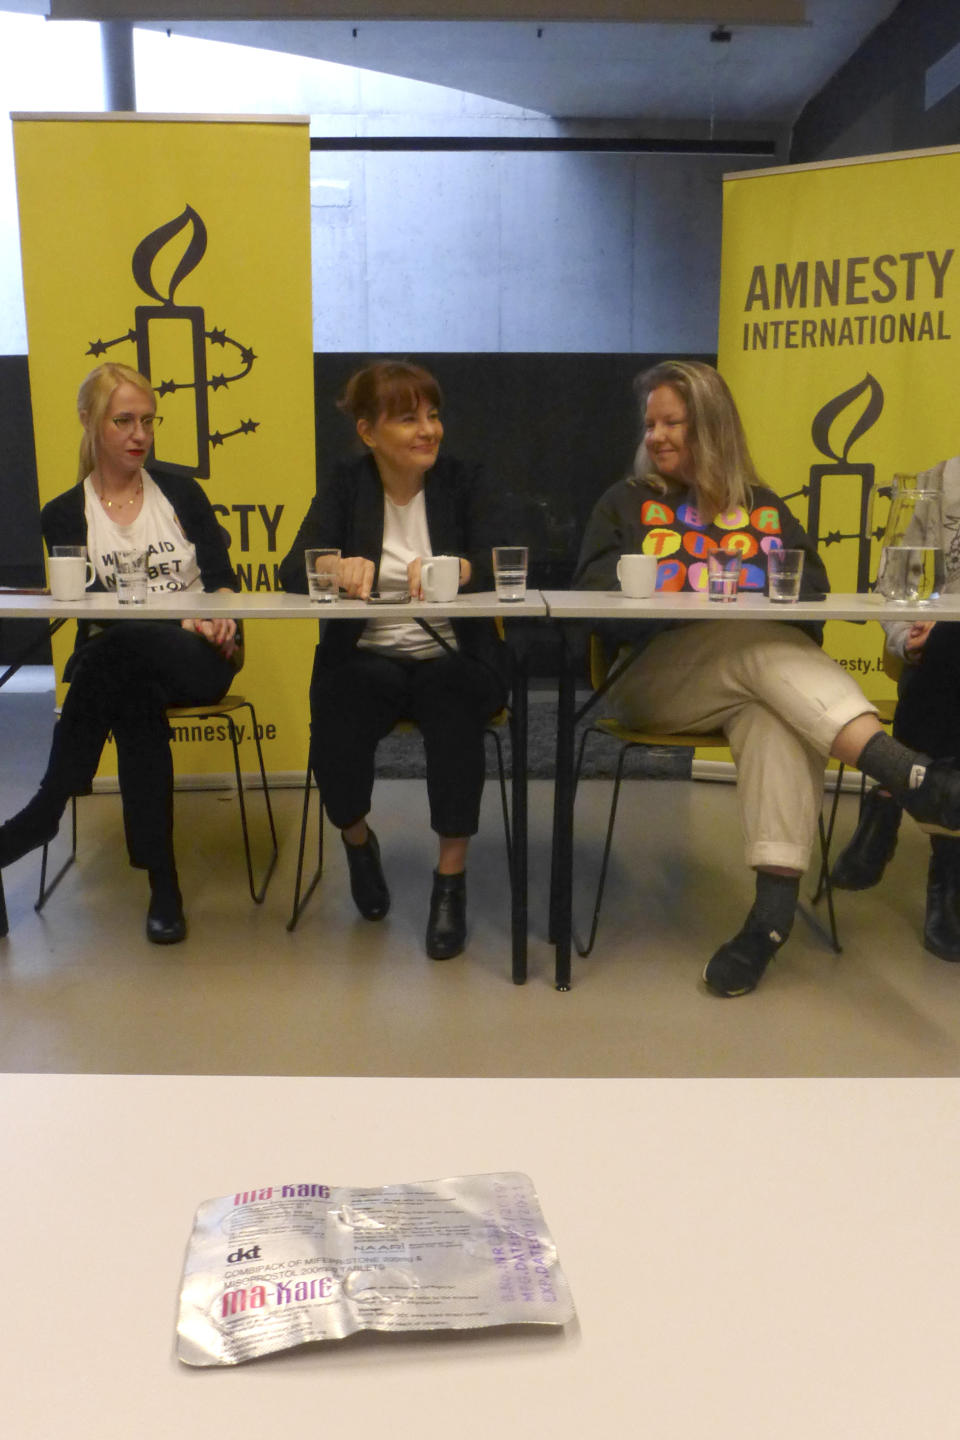 From left, members of the organization Abortion Dream Team Kinga Jelinska, Justyna Wydrzynska and Natalia Broniarczyk speak during a media conference in Brussels, Thursday, March 23, 2023. Justyna Wydrzynska, a women's rights activist, was recently convicted by a Warsaw court for helping a pregnant victim of domestic violence access abortion pills in Poland, sentencing her to eight months of community service. The case has been closely watched by human rights activists, who believe it would set a precedent in a country with some of Europe's most restrictive abortion legislation. (AP Photo/Lorne Cook)